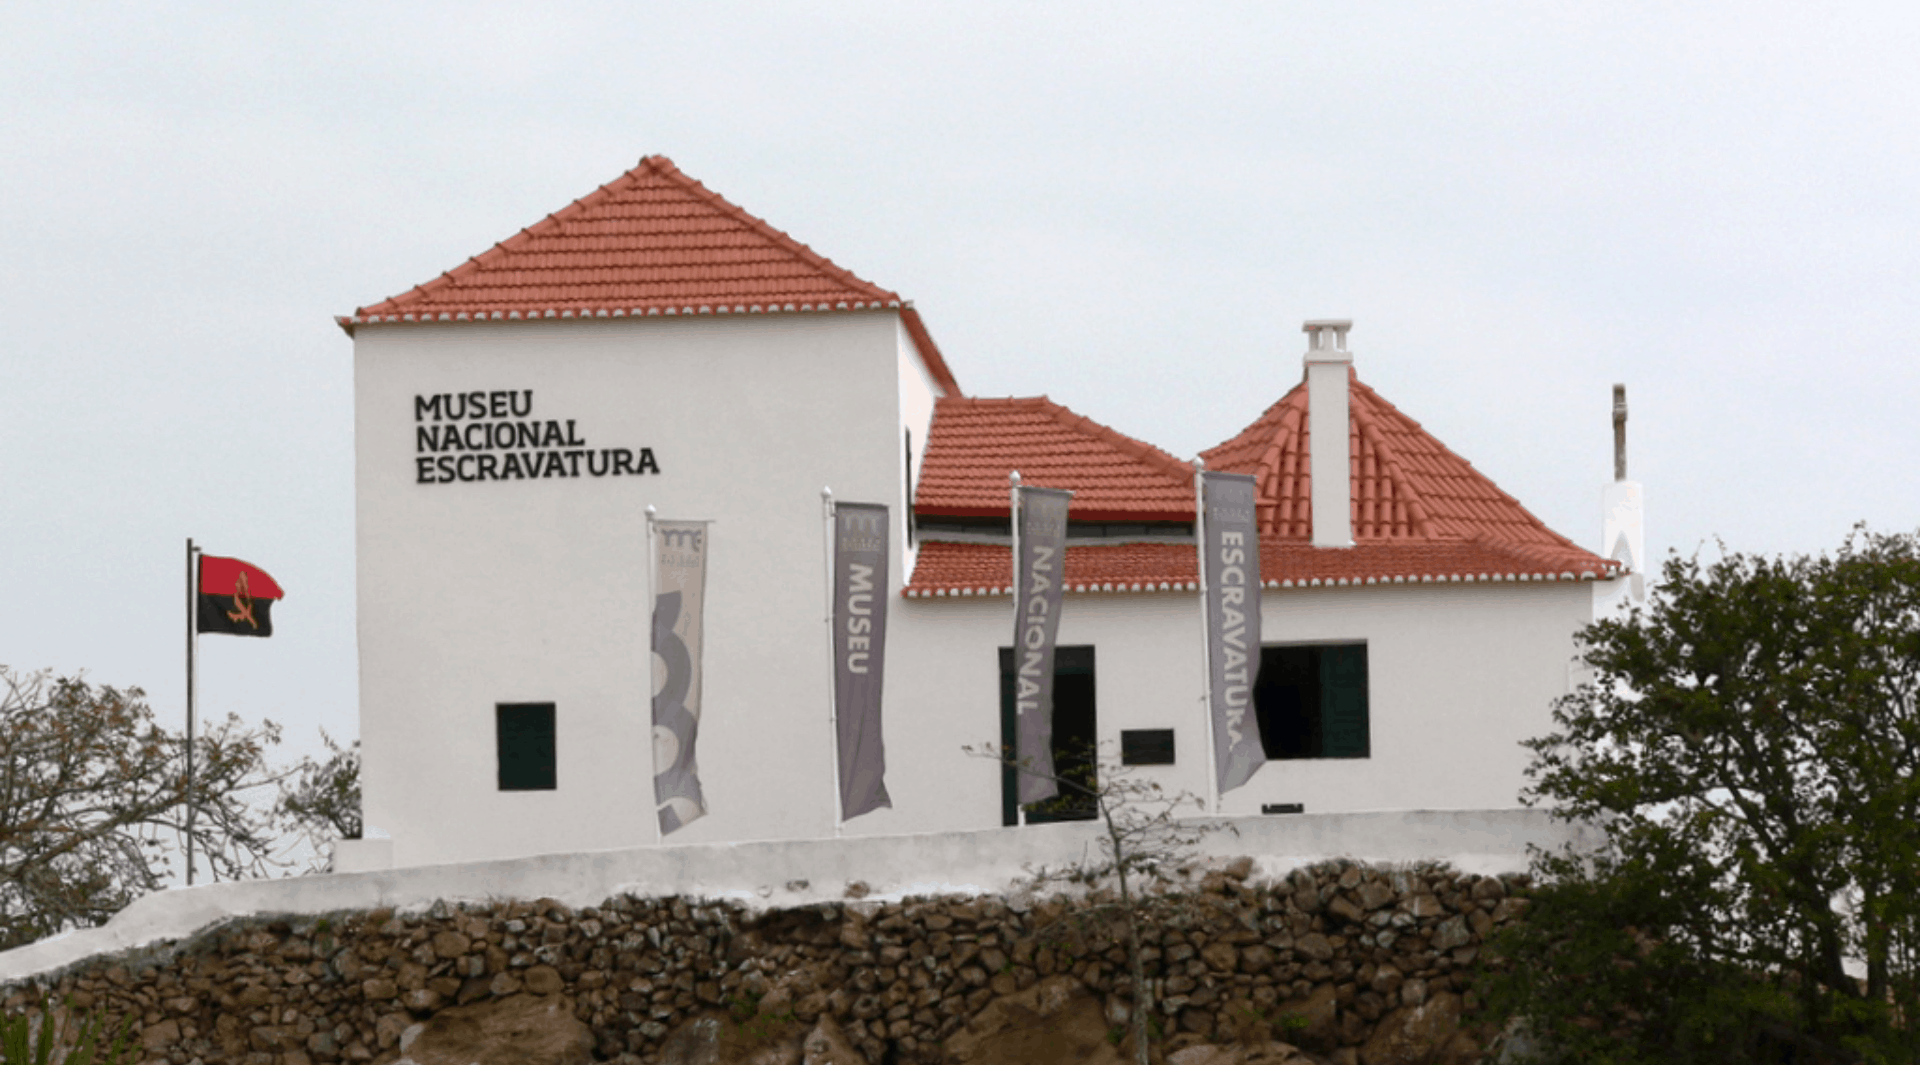 National Museum of Slavery